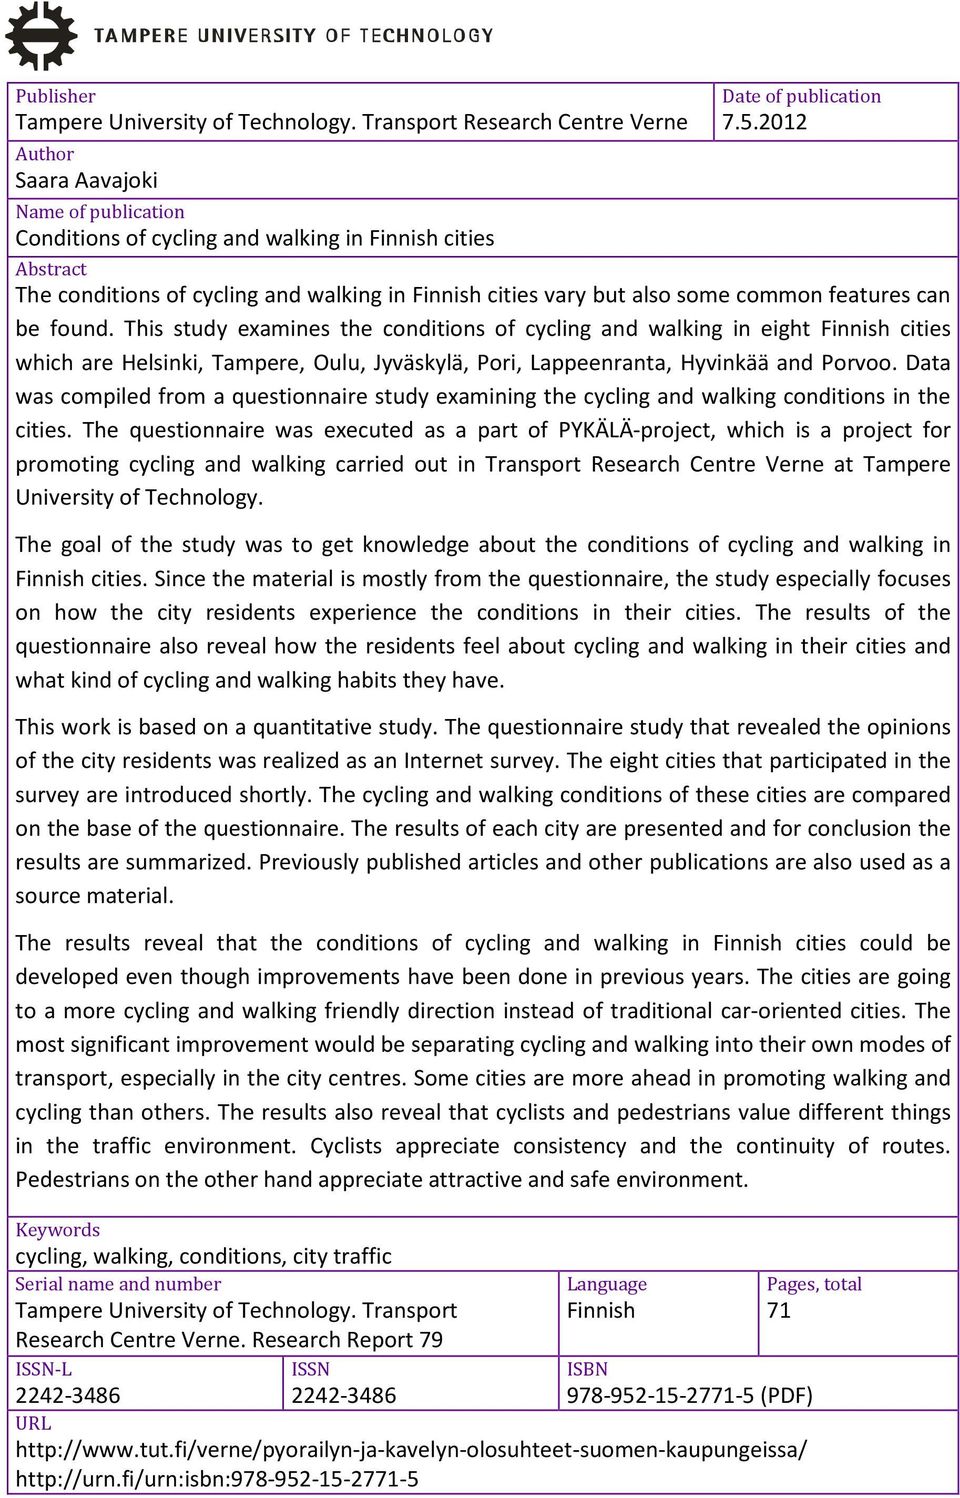 This study examines the conditions of cycling and walking in eight Finnish cities which are Helsinki, Tampere, Oulu, Jyväskylä, Pori, Lappeenranta, Hyvinkää and Porvoo.